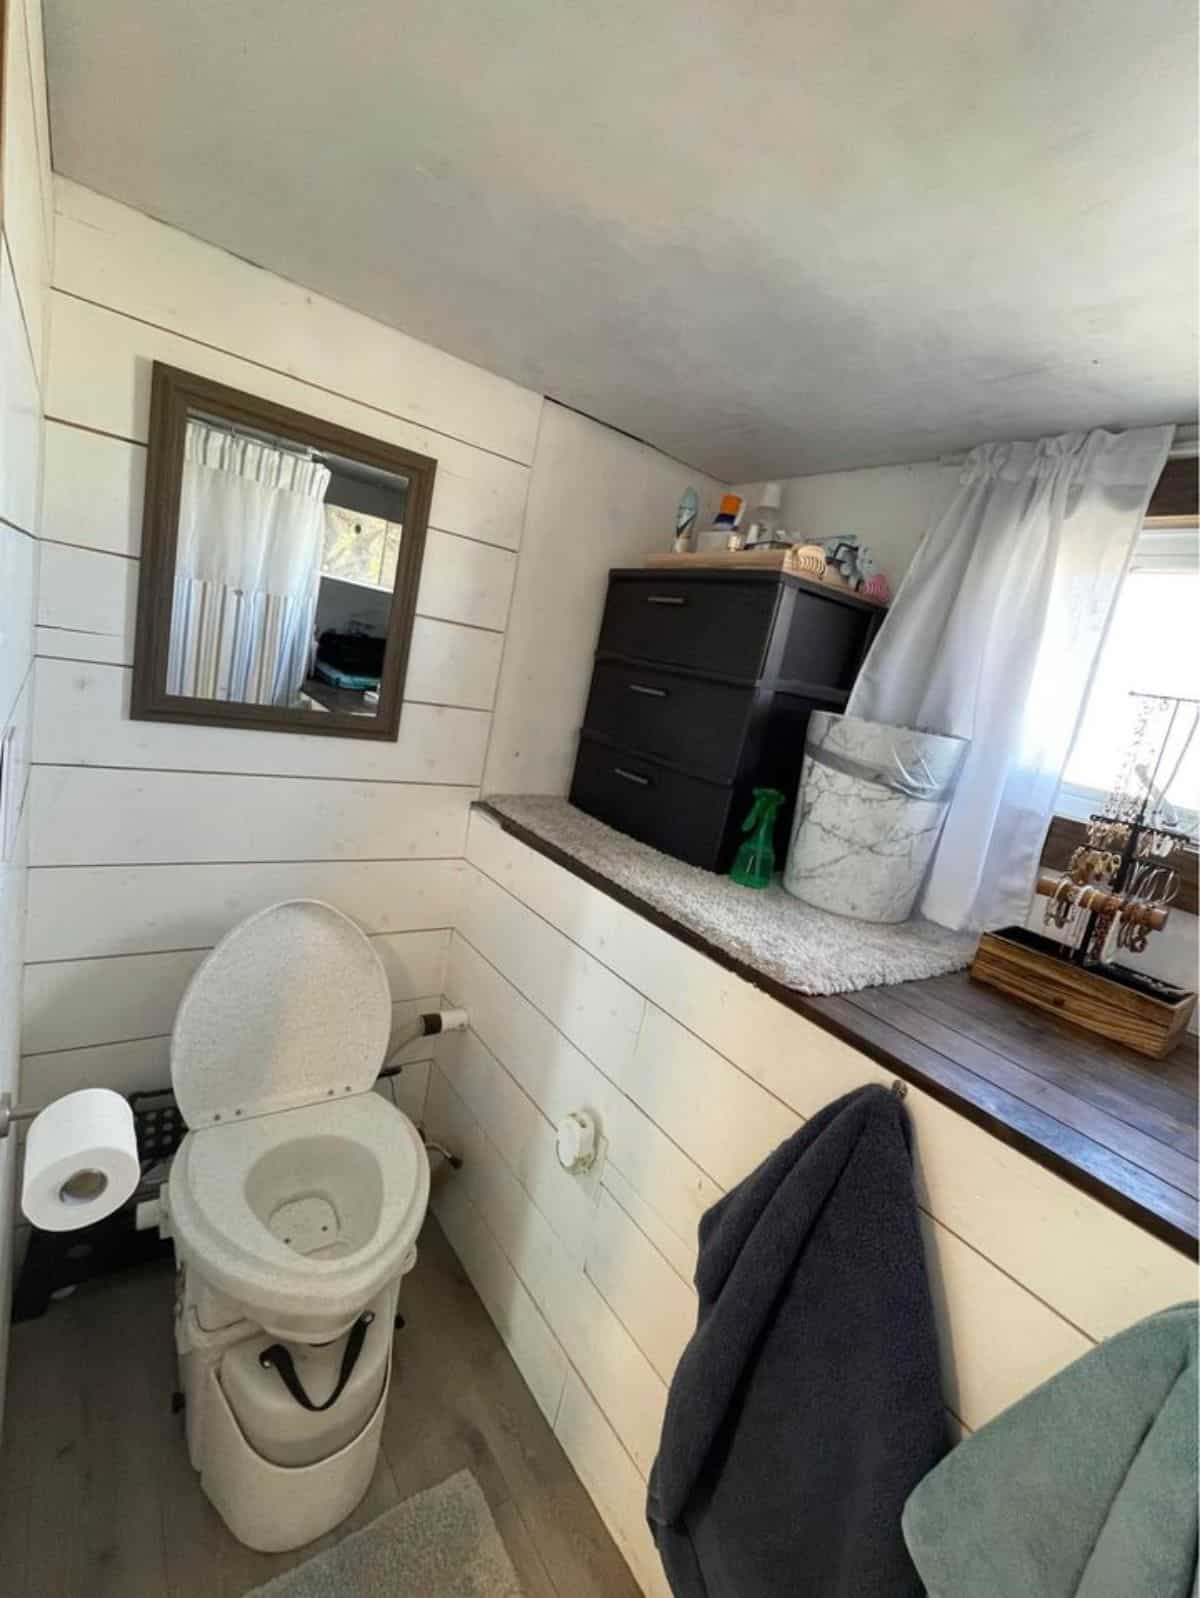 bathroom of tiny home for a couple has all the standard fittings